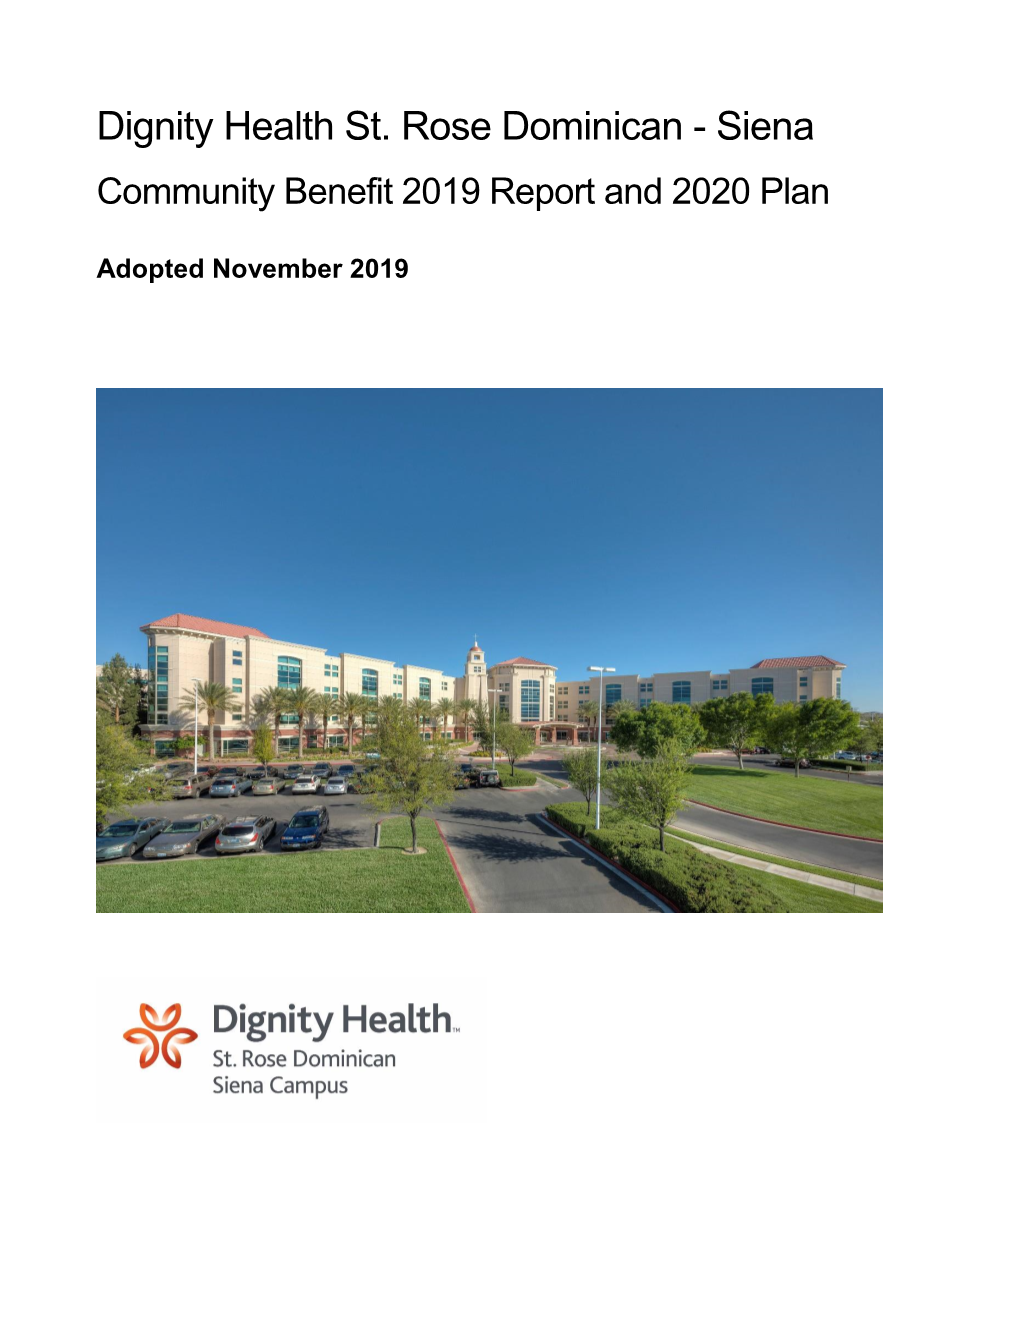 Dignity Health St. Rose Dominican - Siena